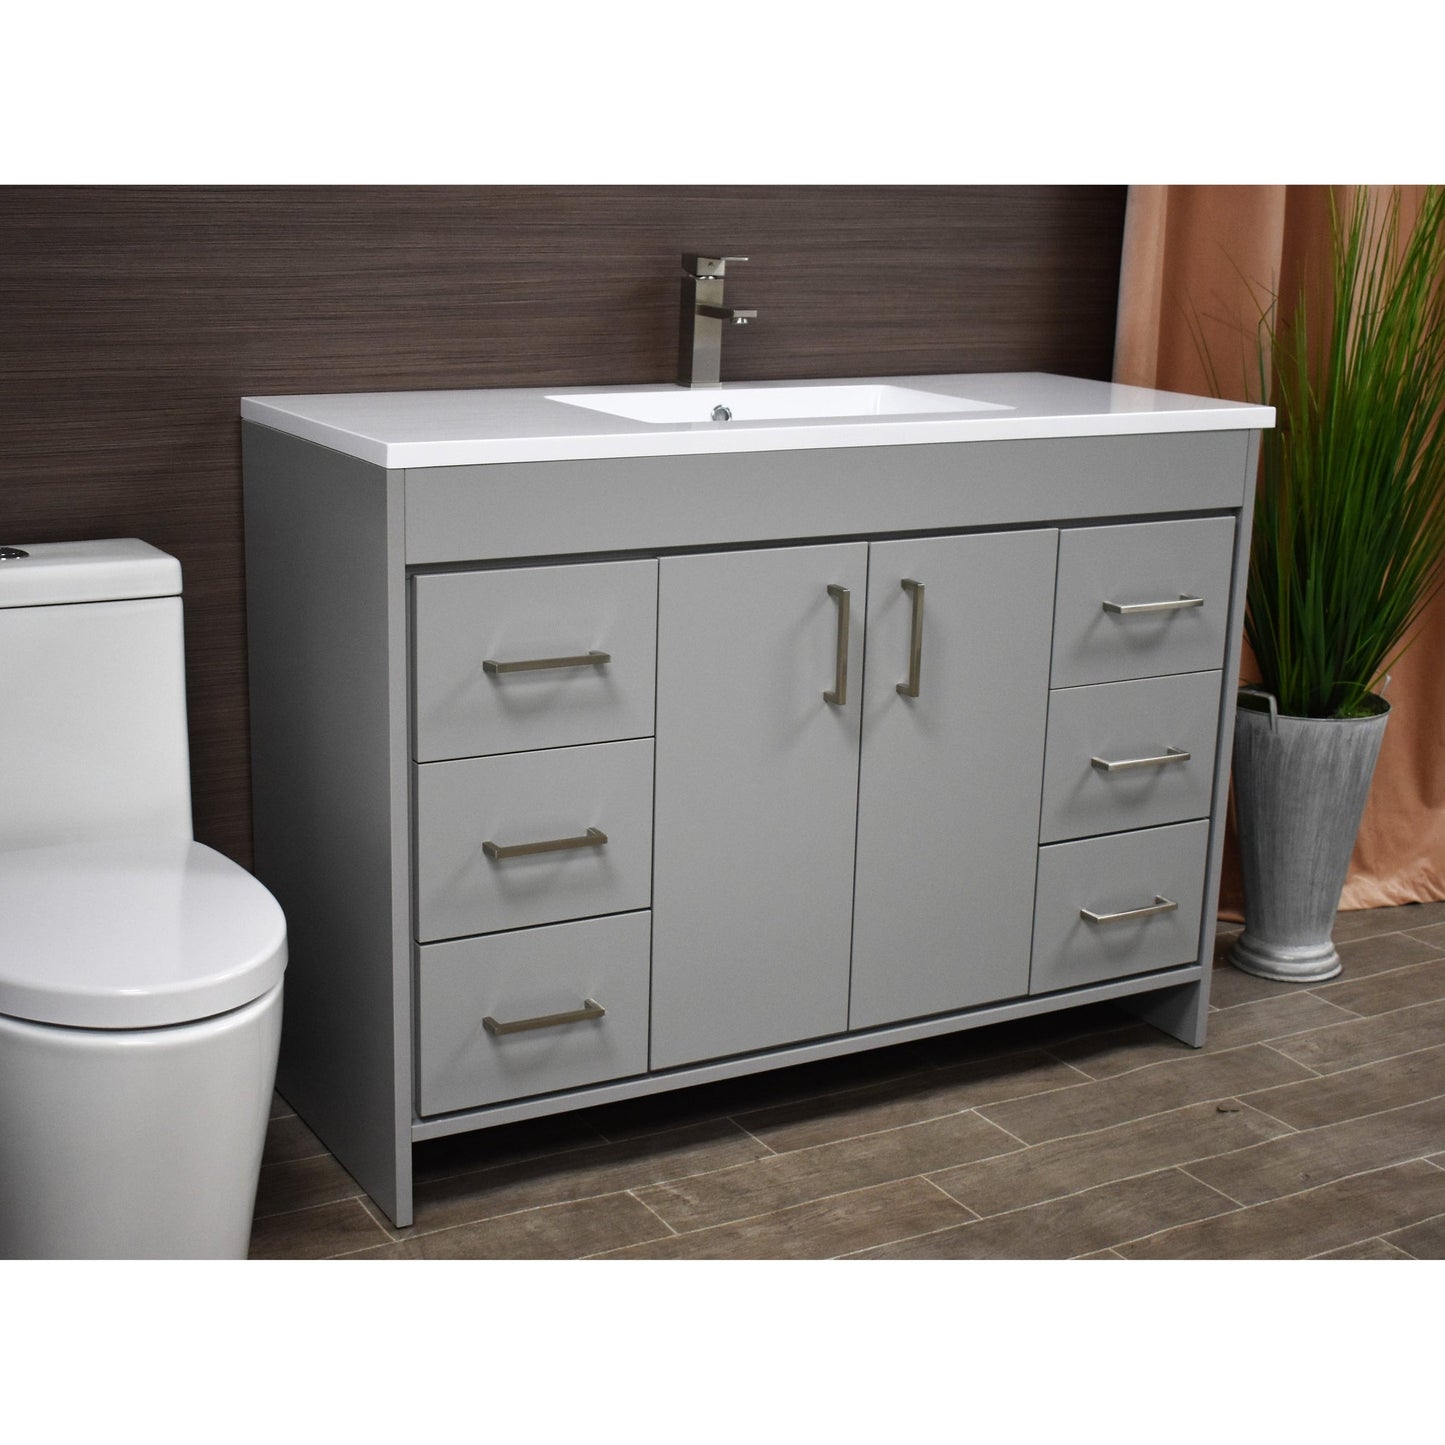 Volpa USA Rio 48" Gray Freestanding Modern Bathroom Vanity With Integrated Acrylic Top and Brushed Nickel Handles